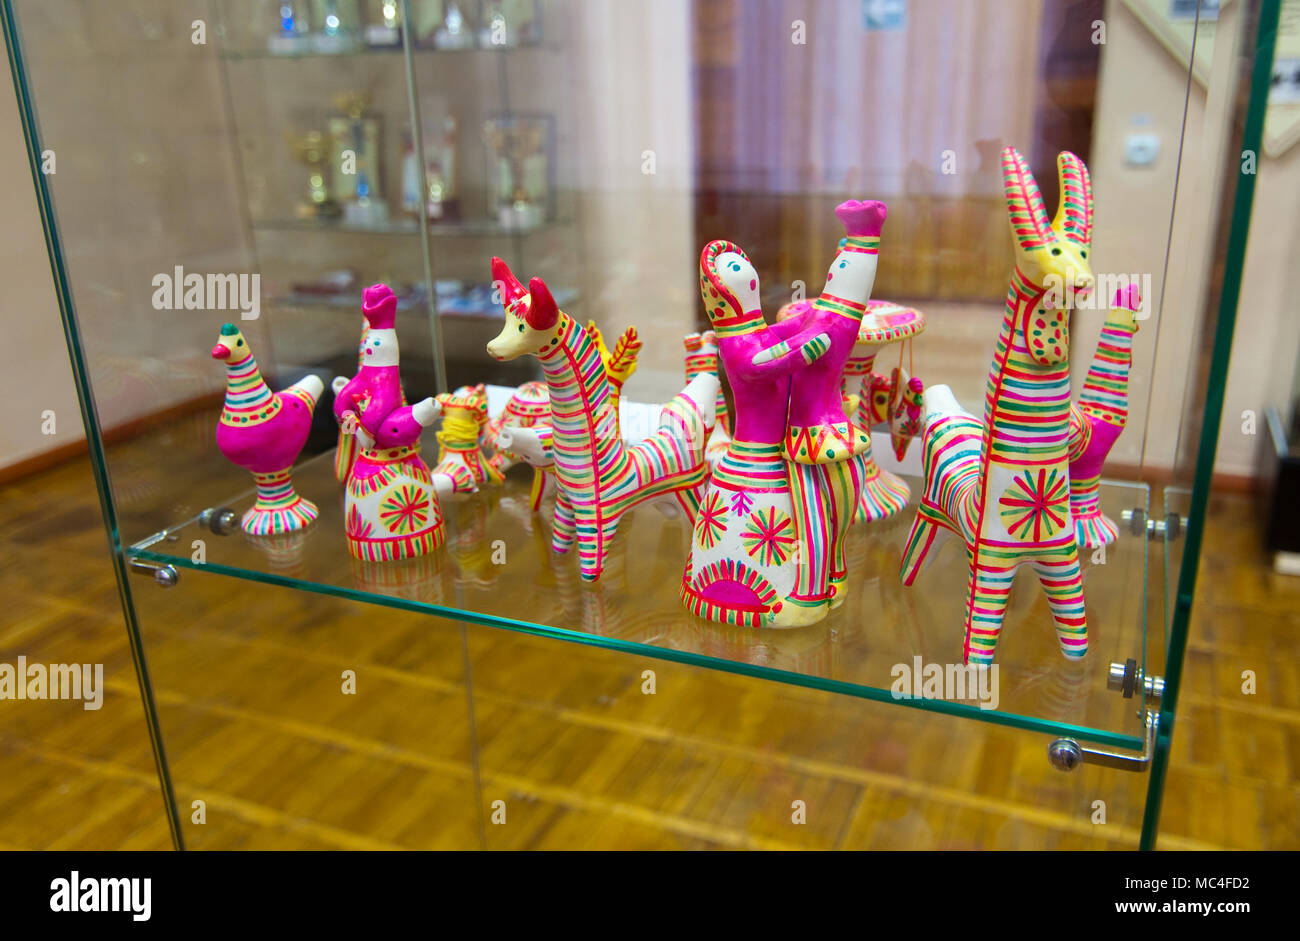 Duhovshhina, Russia - August 15, 2012: Samples of the Russian Filimonov toy Stock Photo